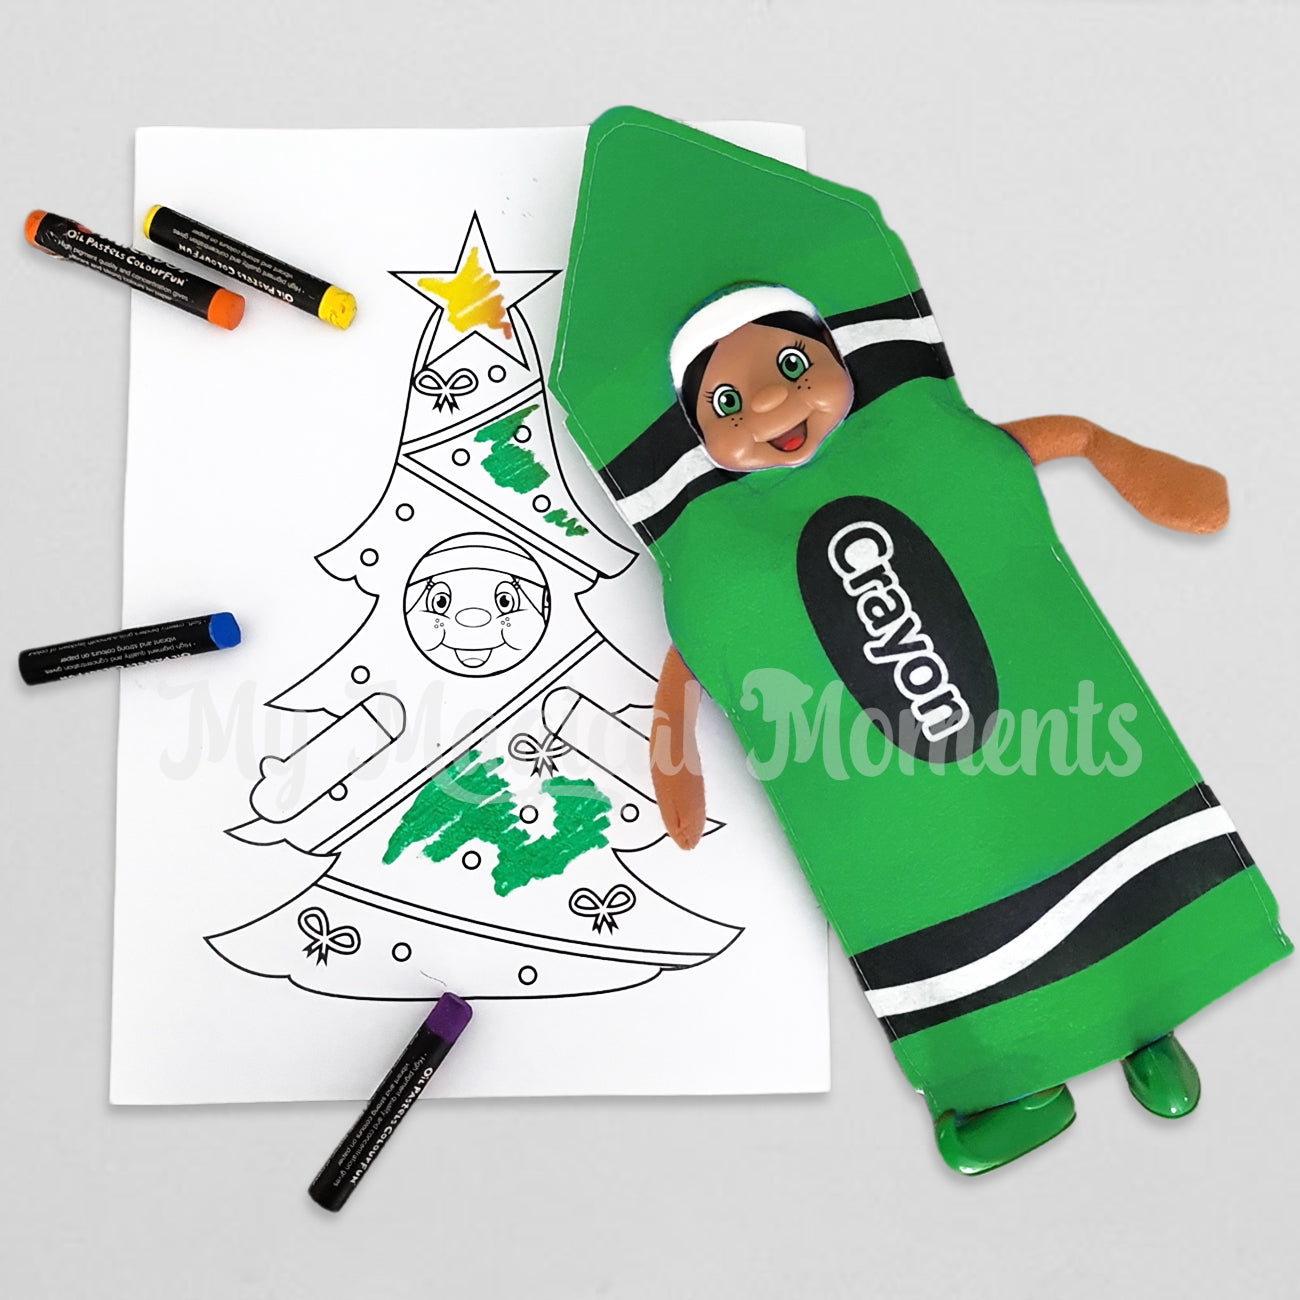 Black hair elf dressed as a green crayon colouring her self with crayons